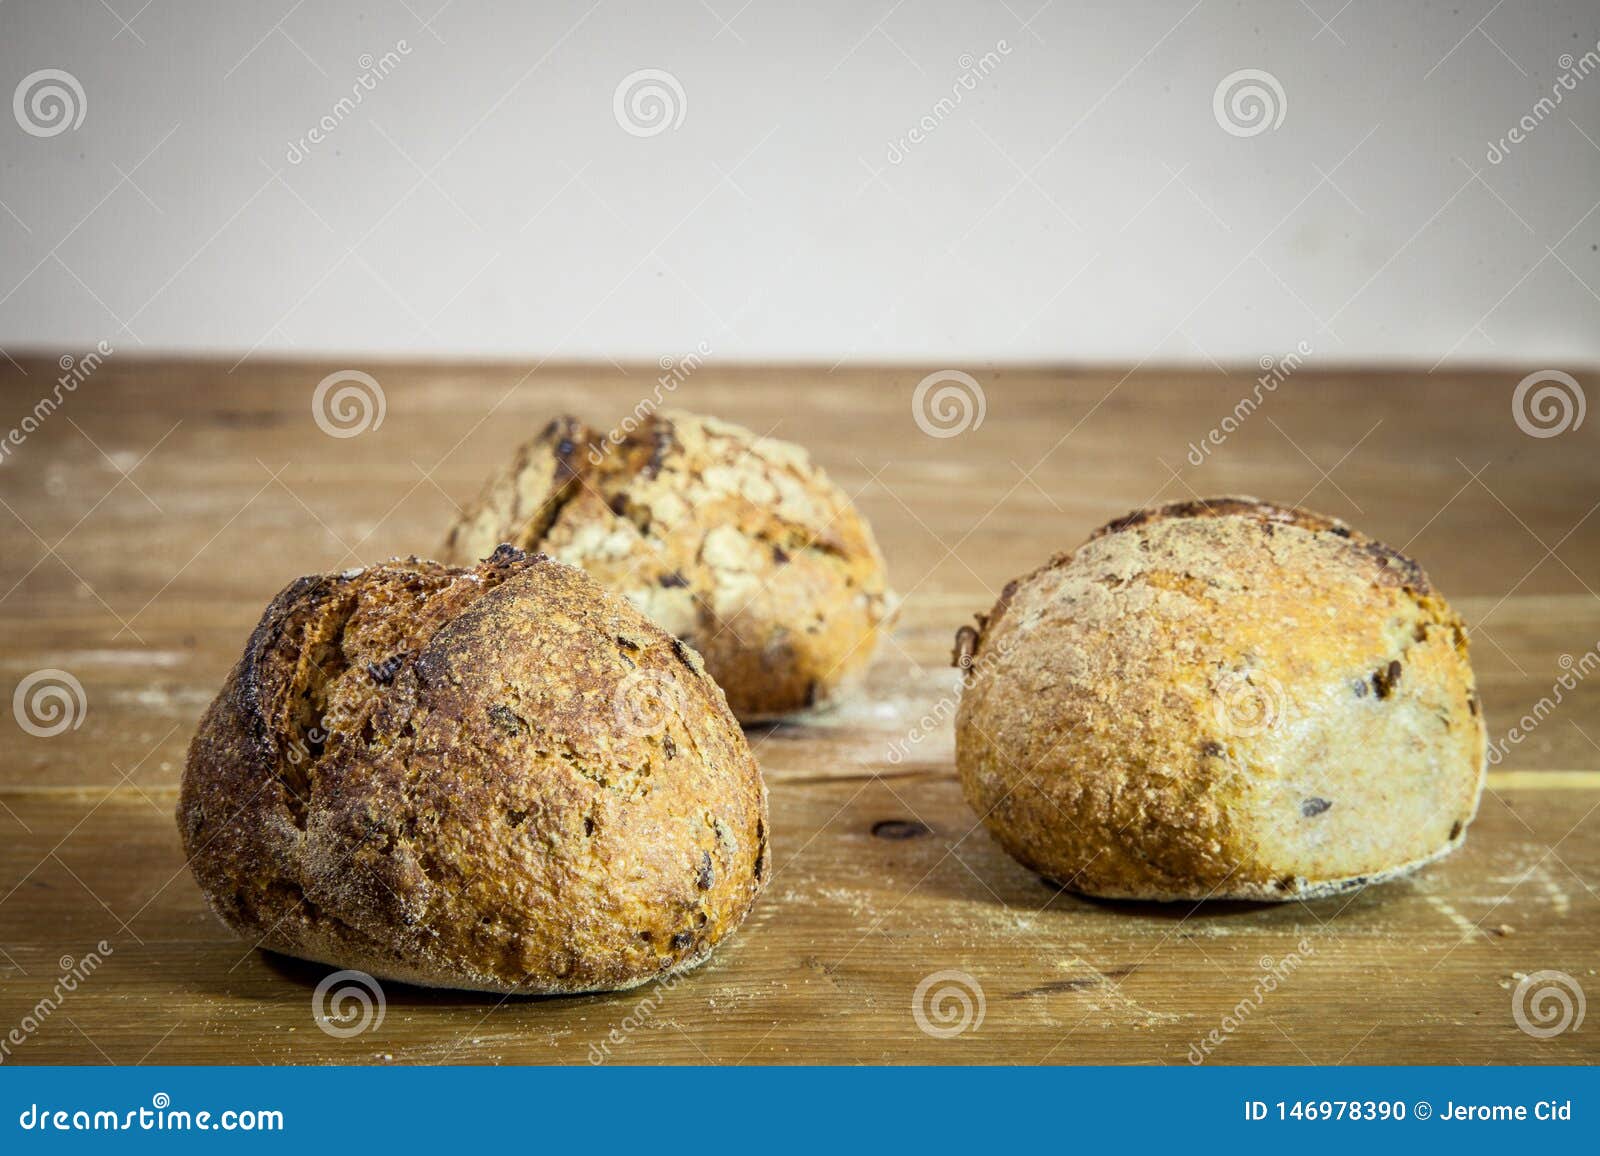 Three Small Loafs Of French Bread On Display On A Rustic Wooden